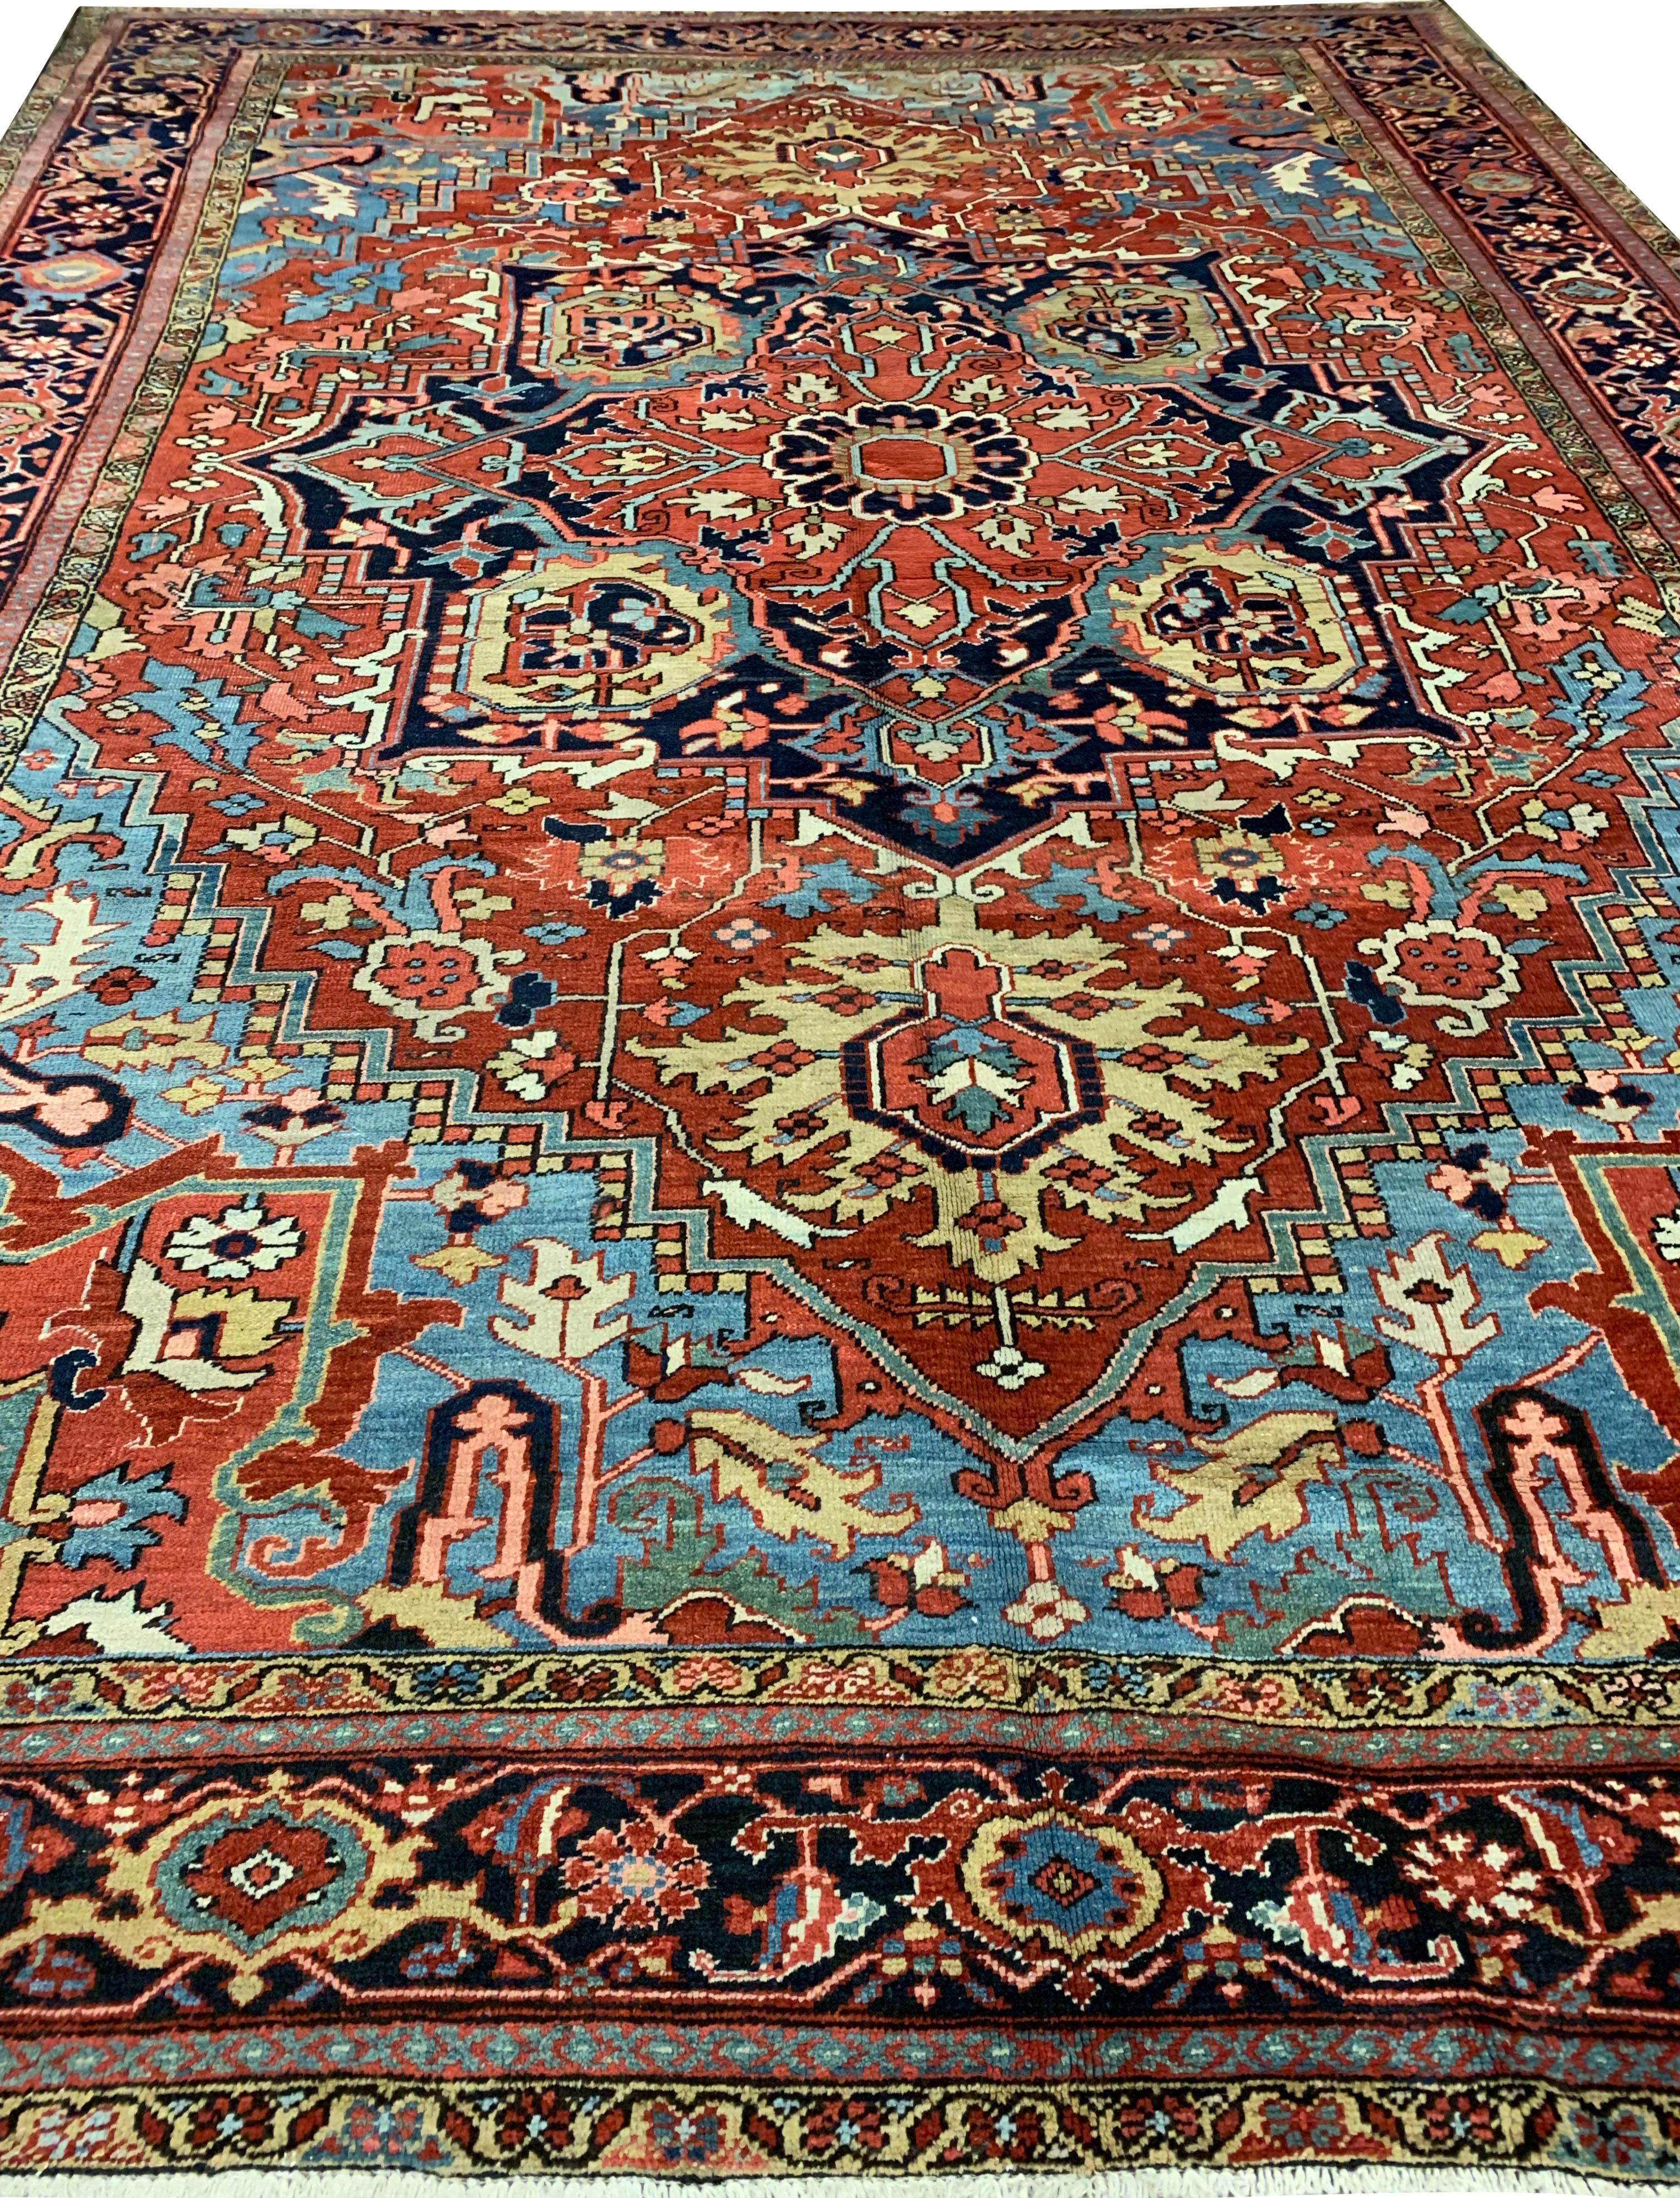 Antique Persian Heriz rug, 9'9 x 13'1. As perpetually fashionable as they are collectible, traditional Heriz rugs are skilfully woven in vibrant colors and emphatic geometric designs. This rug has a character all its own with the dark navy border